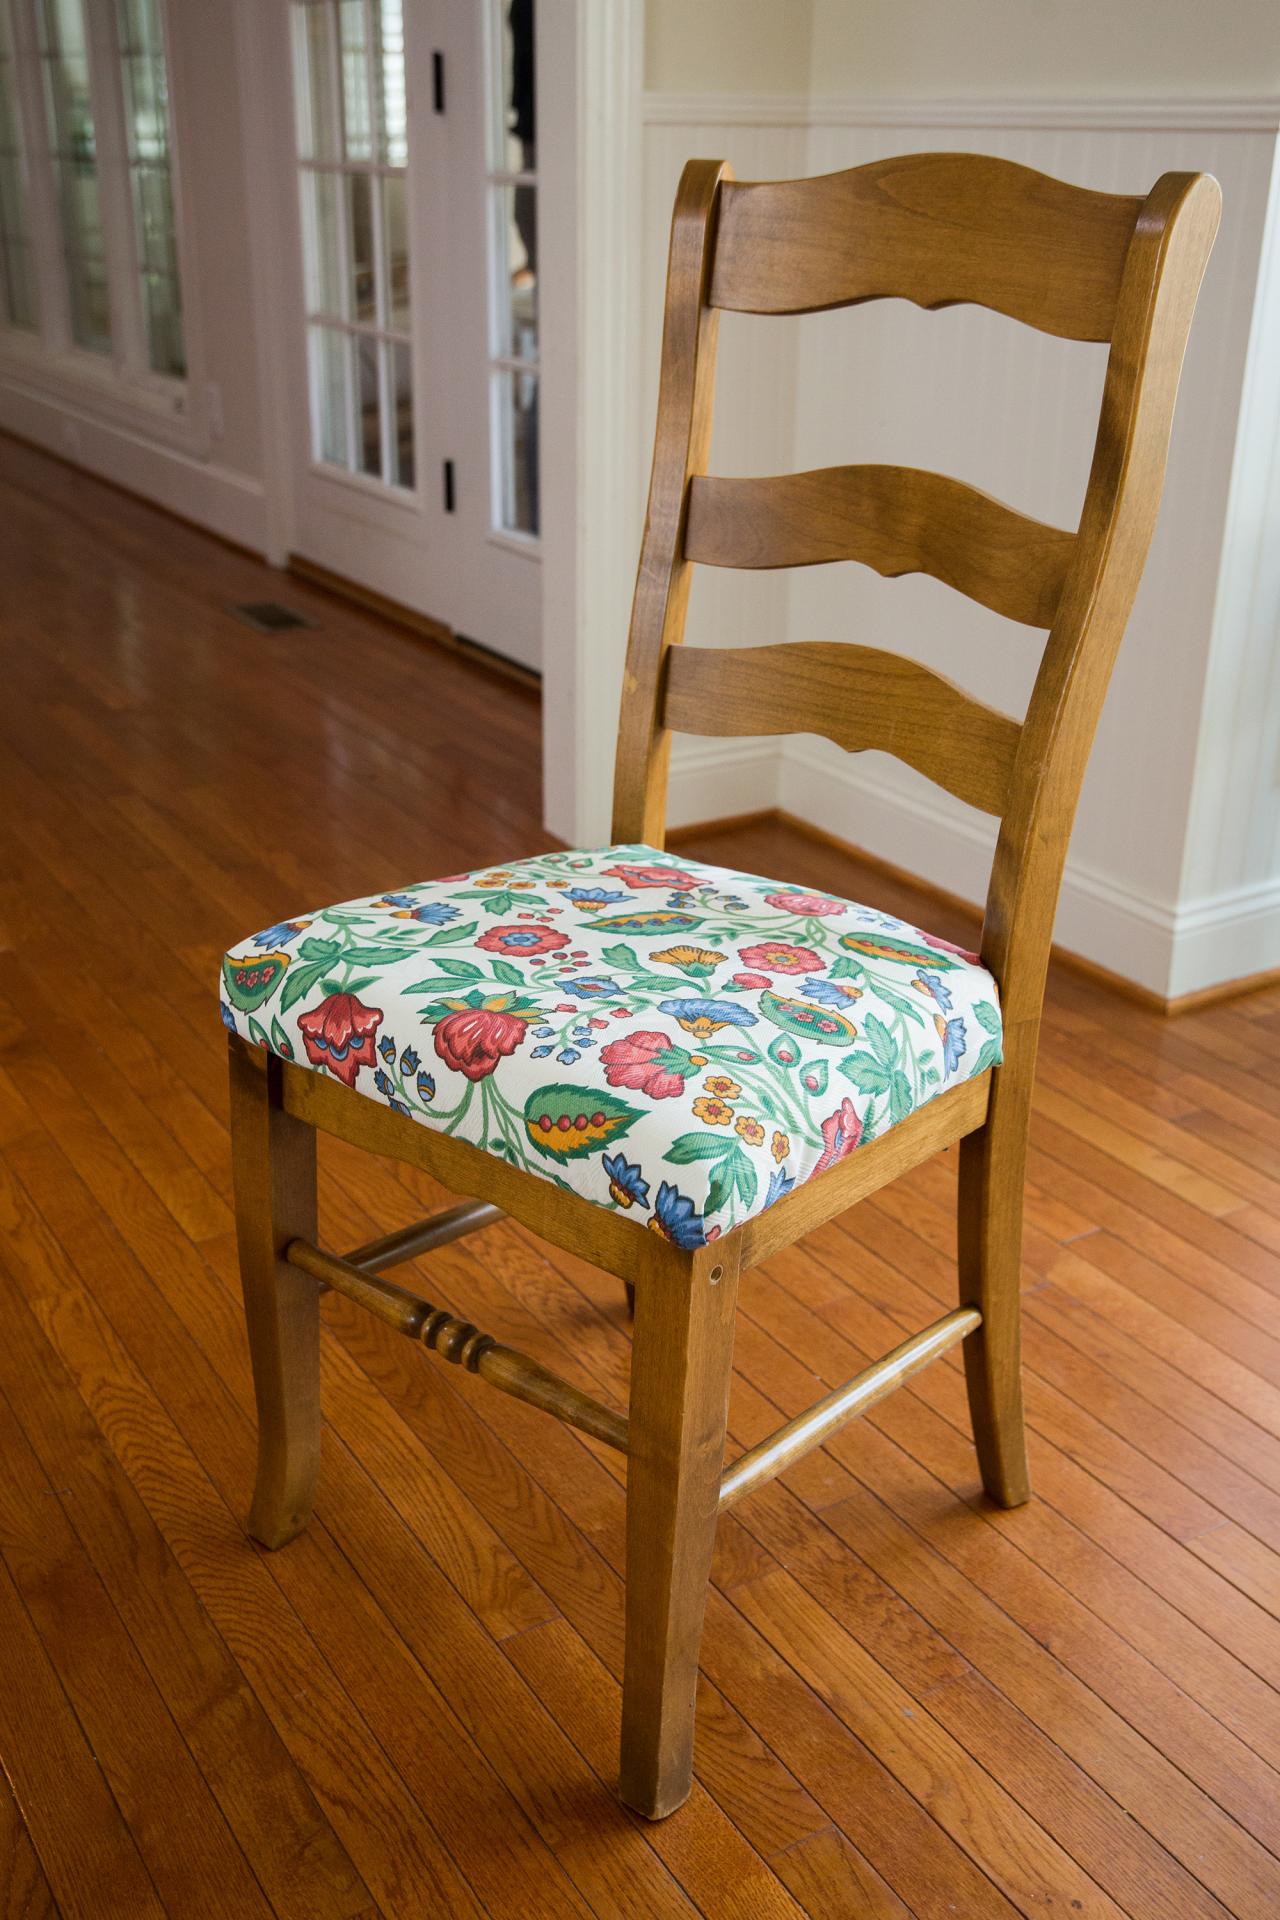 How To Reupholster A Chair Seat With, Foam For Dining Room Chairs